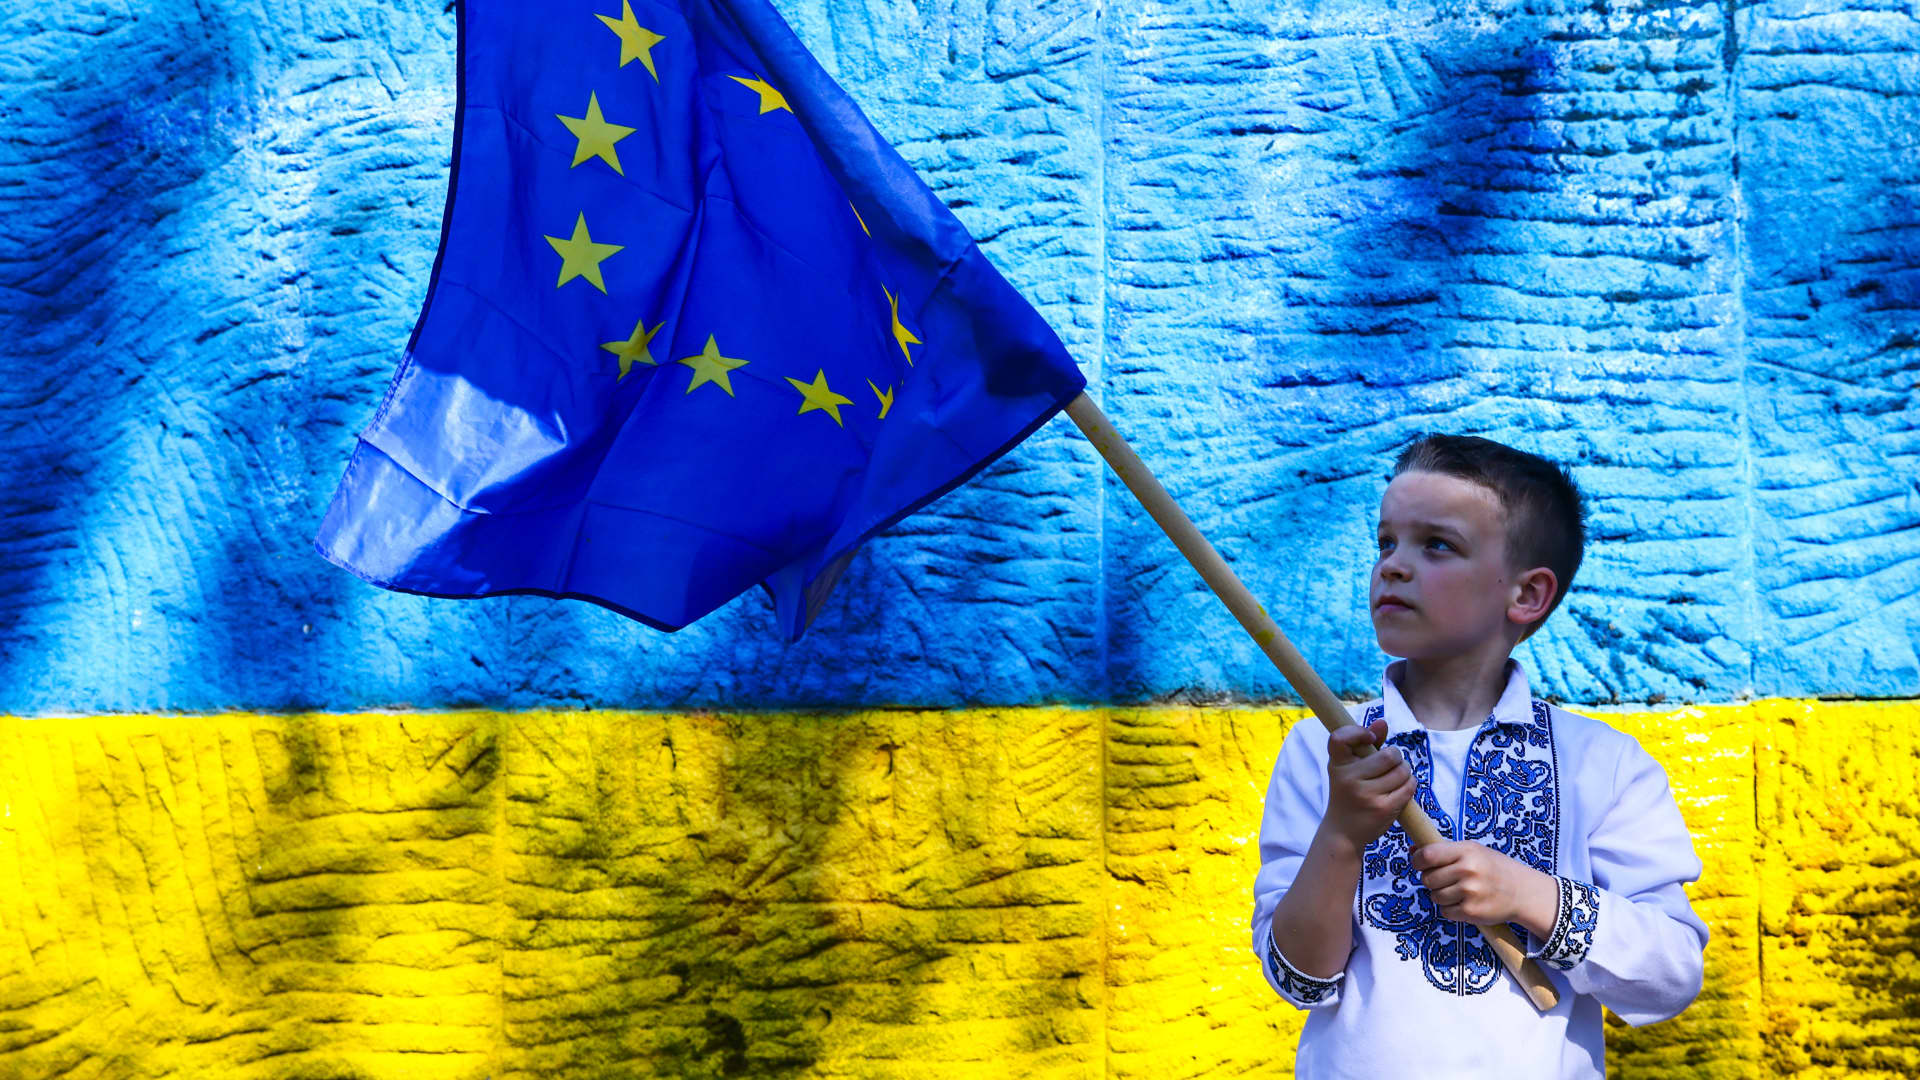 Ukraine has requested to become a member of the EU, but the process is likely to take some time and it is unclear if there is a broad support to accept several new nations in the bloc.